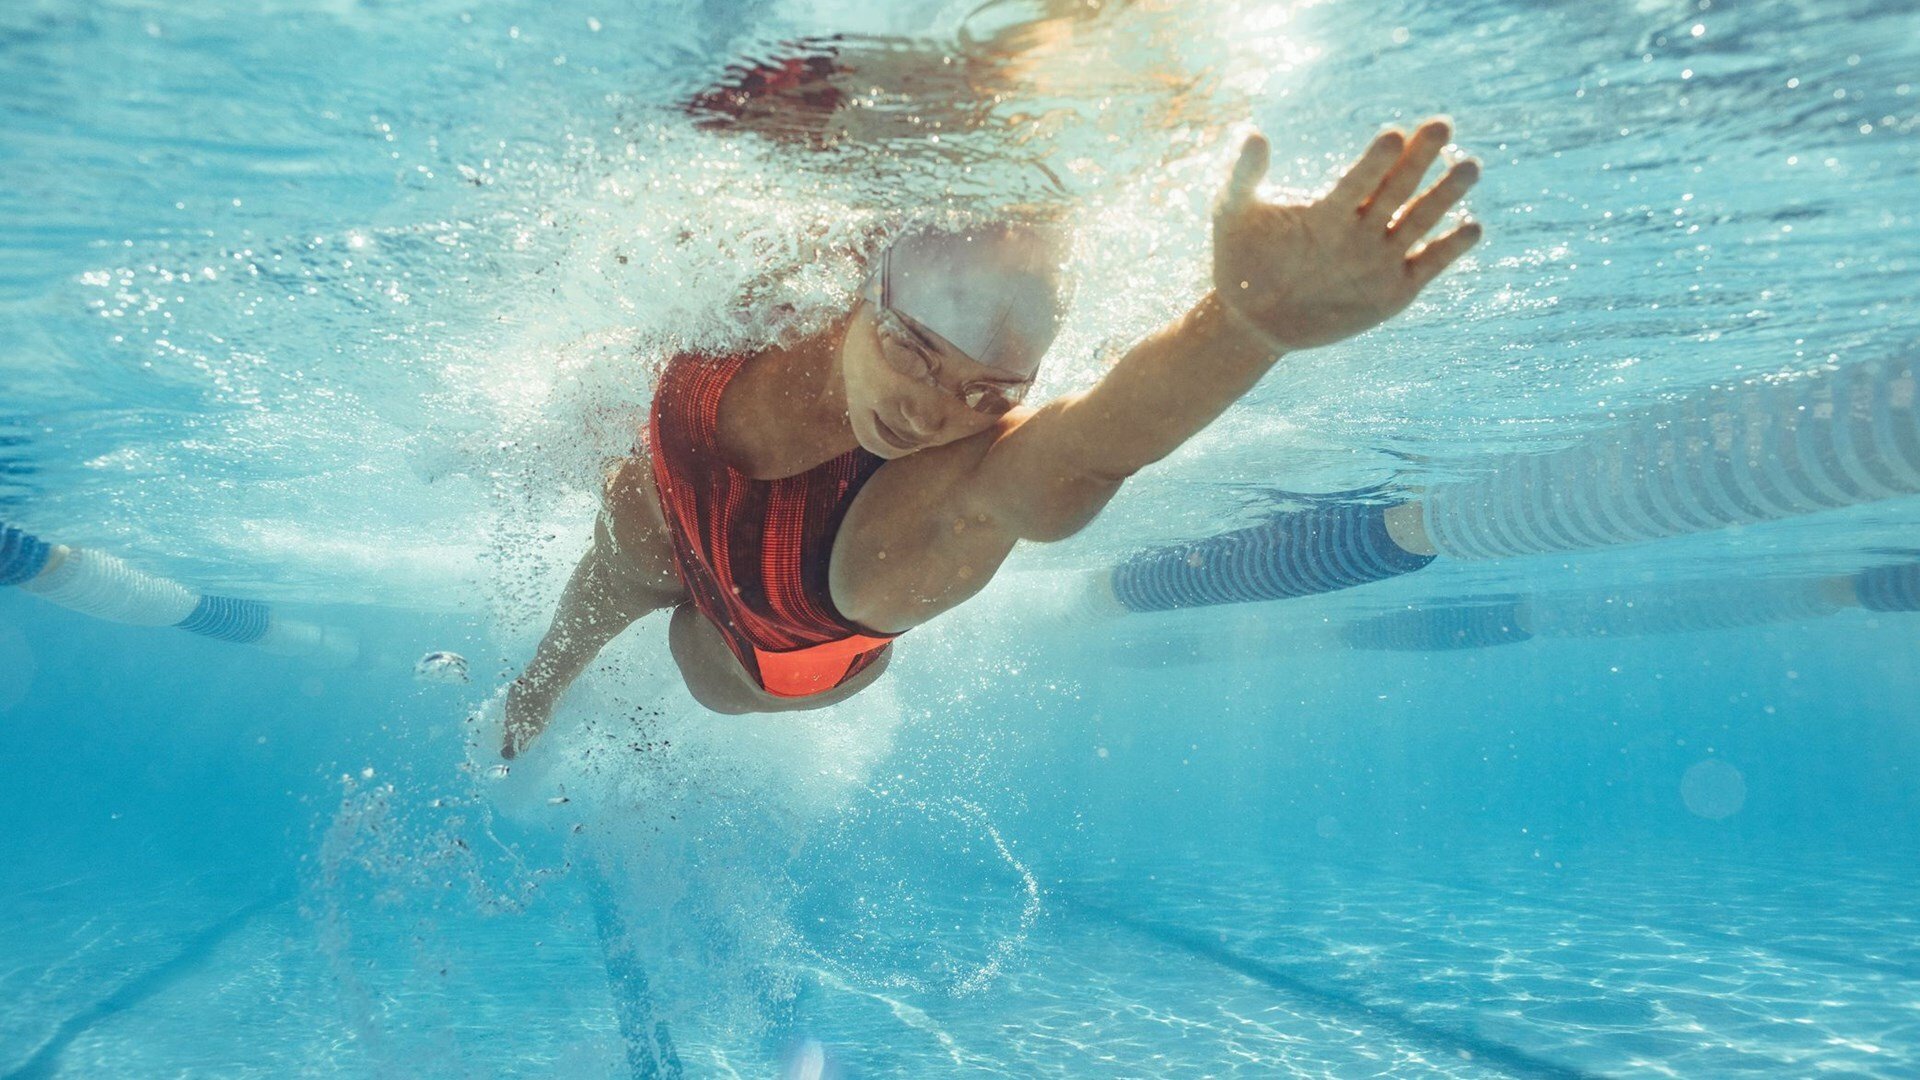 Underwater view of a swimmer in a swimming cap doing the front crawl in a pool